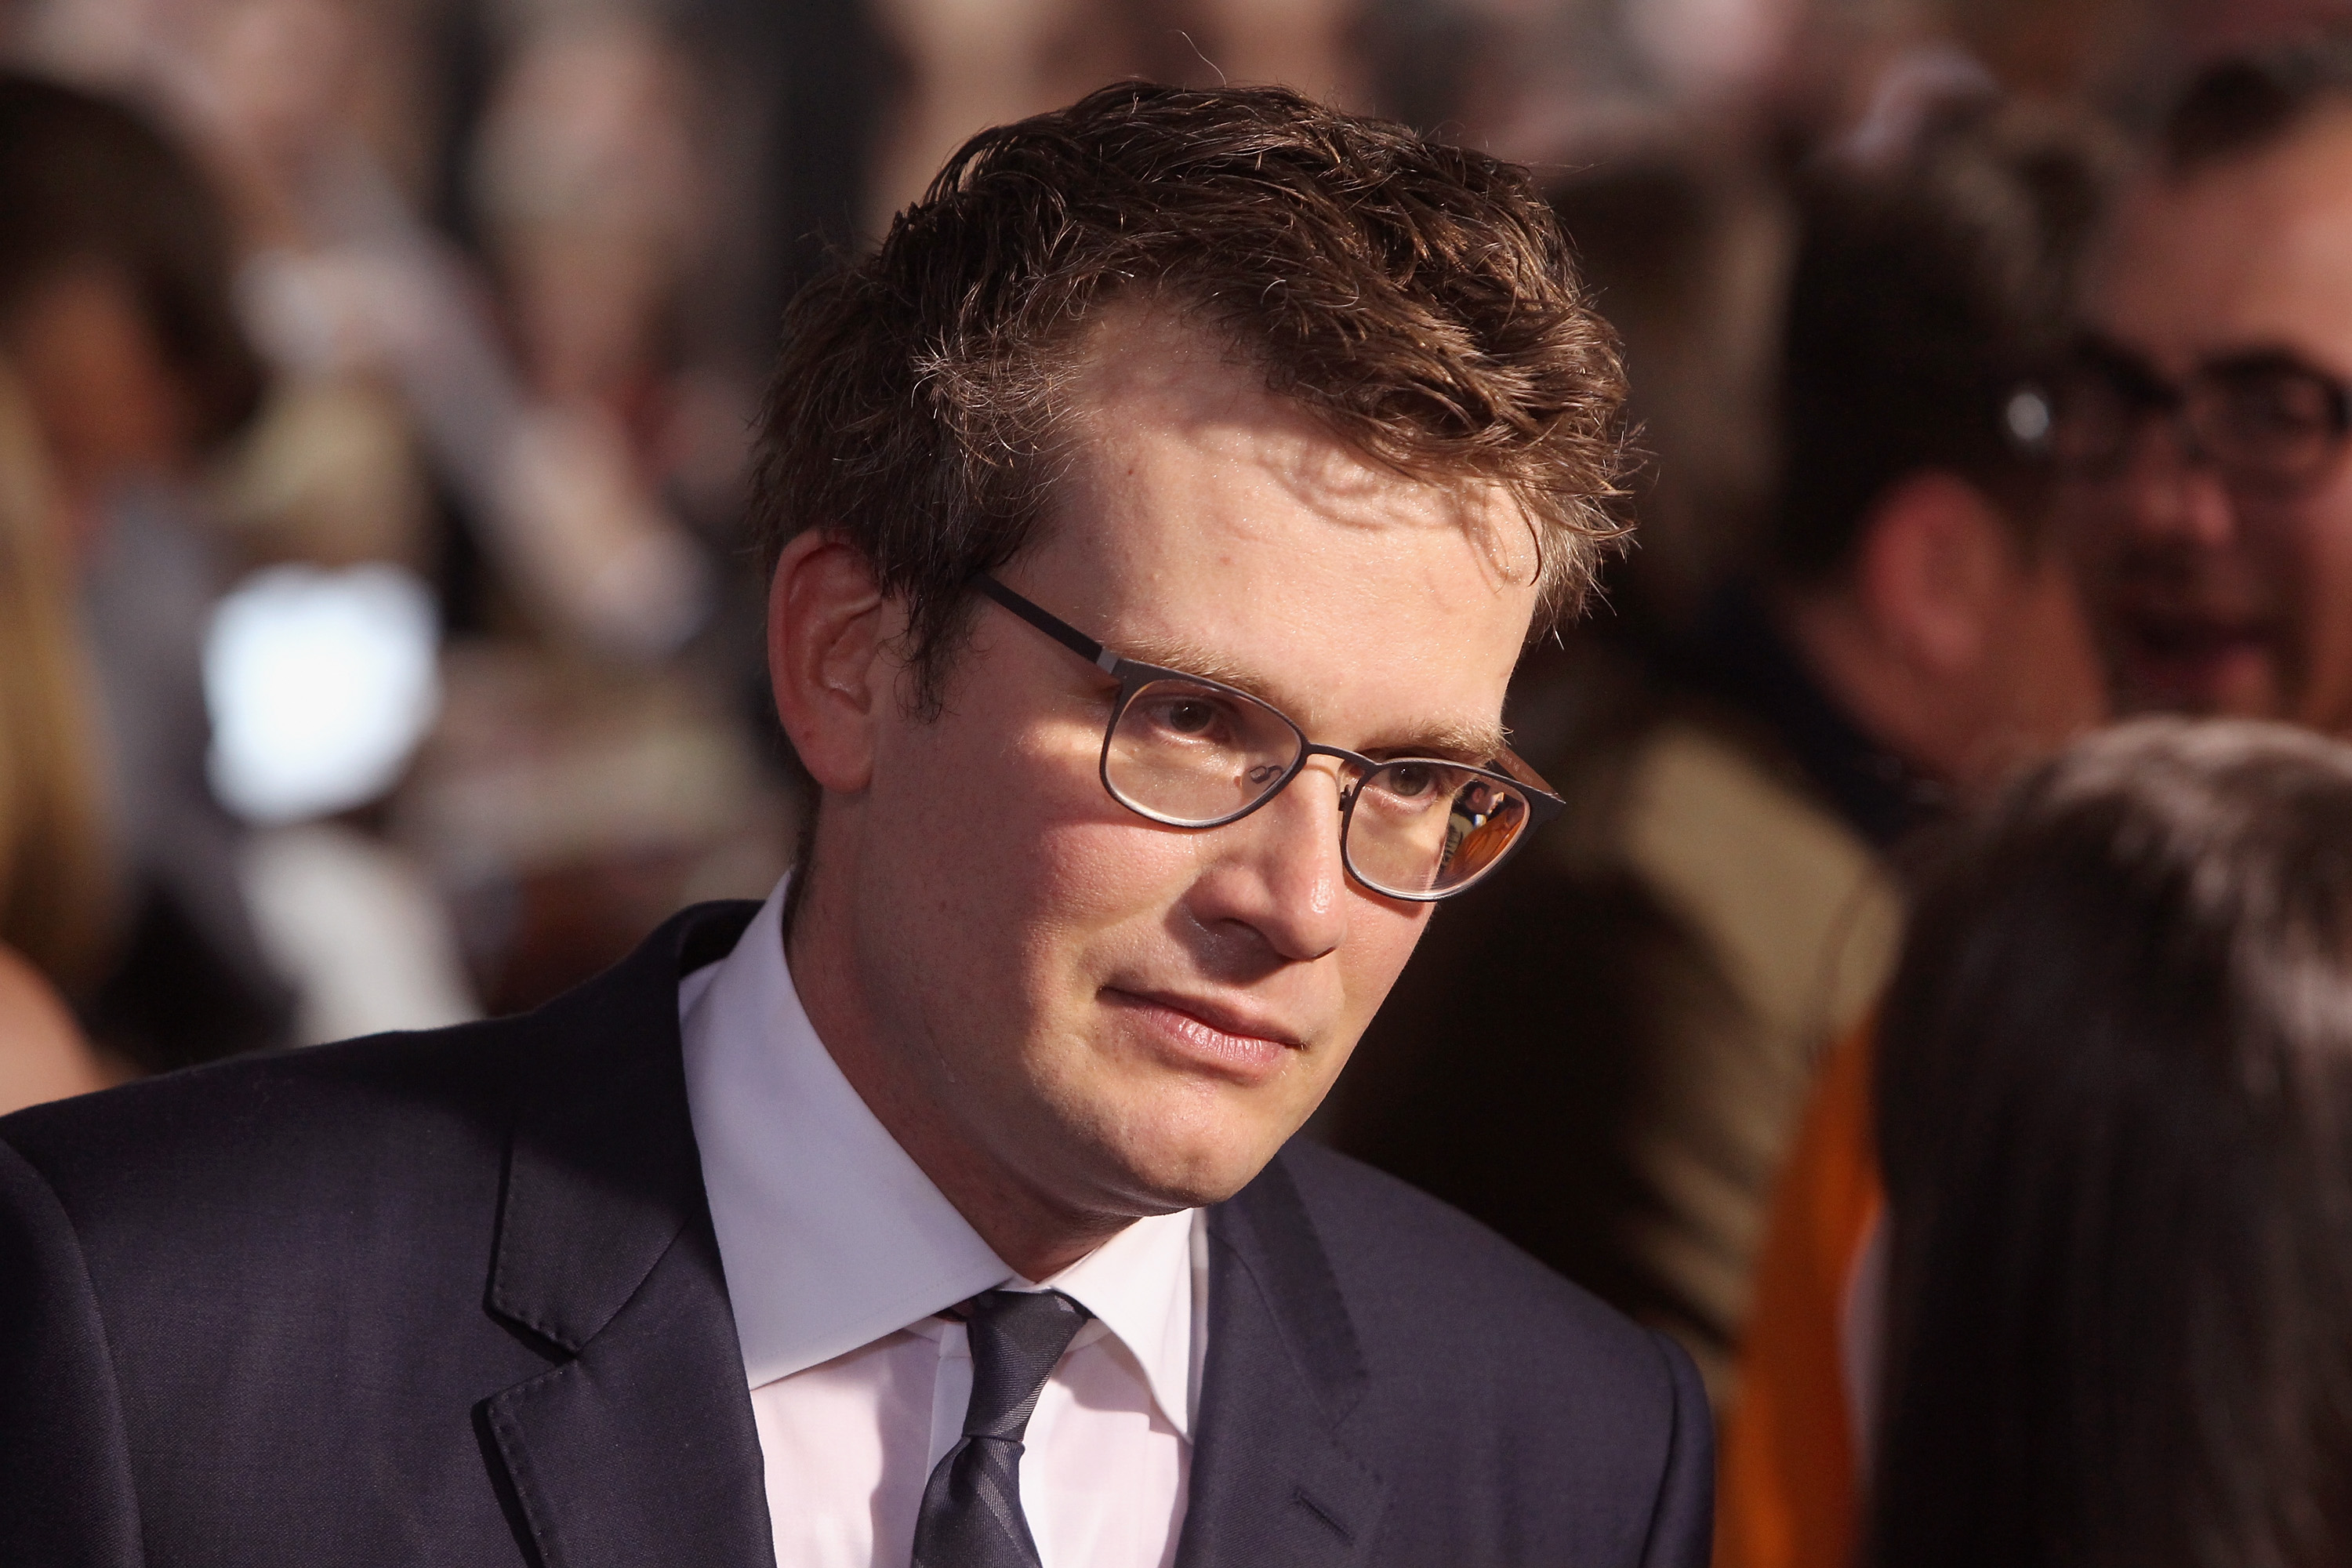 Author/producer John Green attends the "Paper Towns" New York premiere at AMC Loews Lincoln Square on July 21, 2015 in New York City. (Jim Spellman&mdash;WireImage)